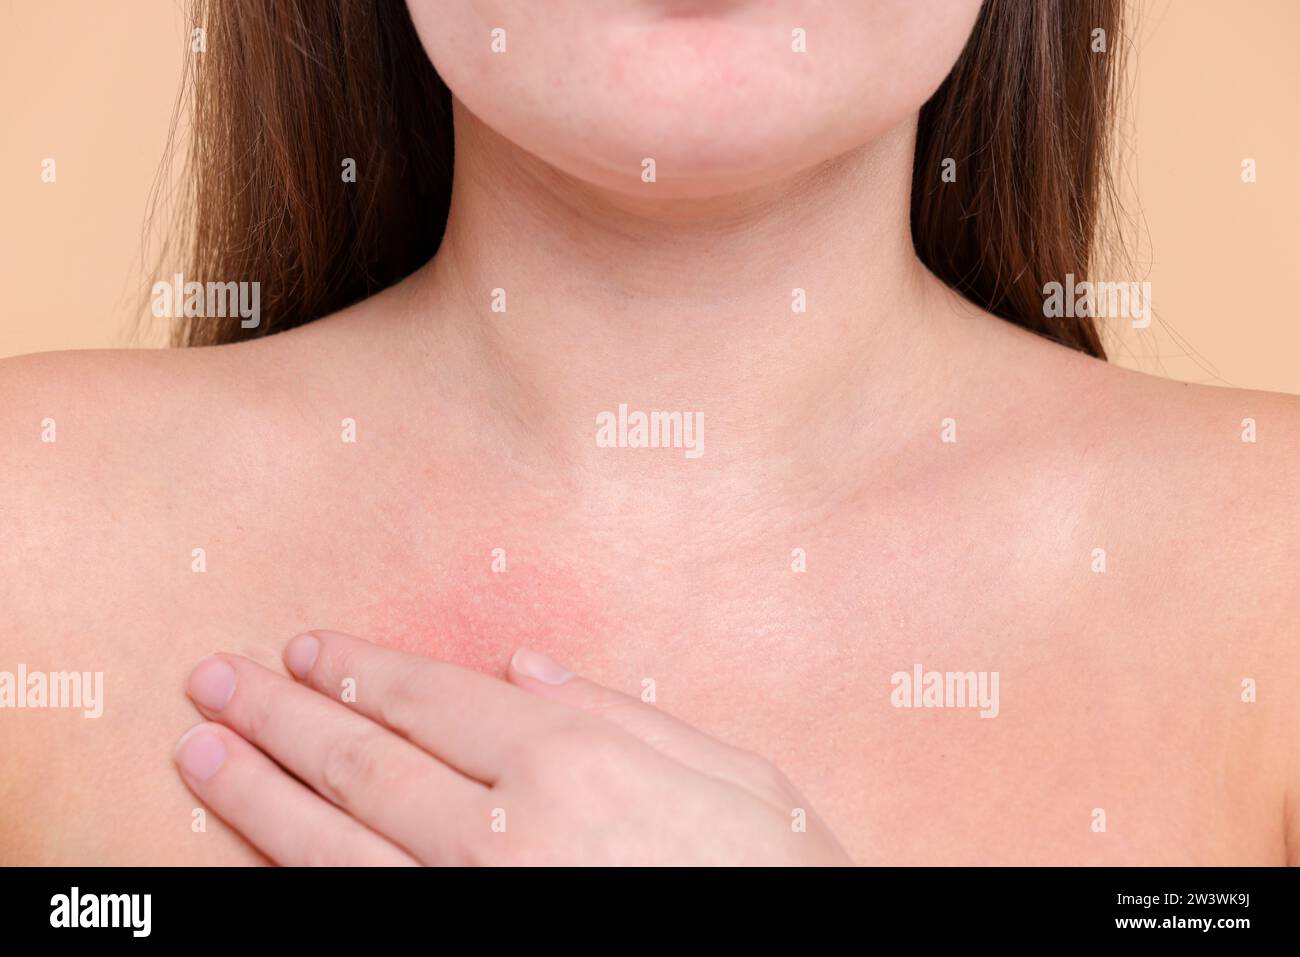 Closeup view of woman with reddened skin on her collarbone against beige background Stock Photo